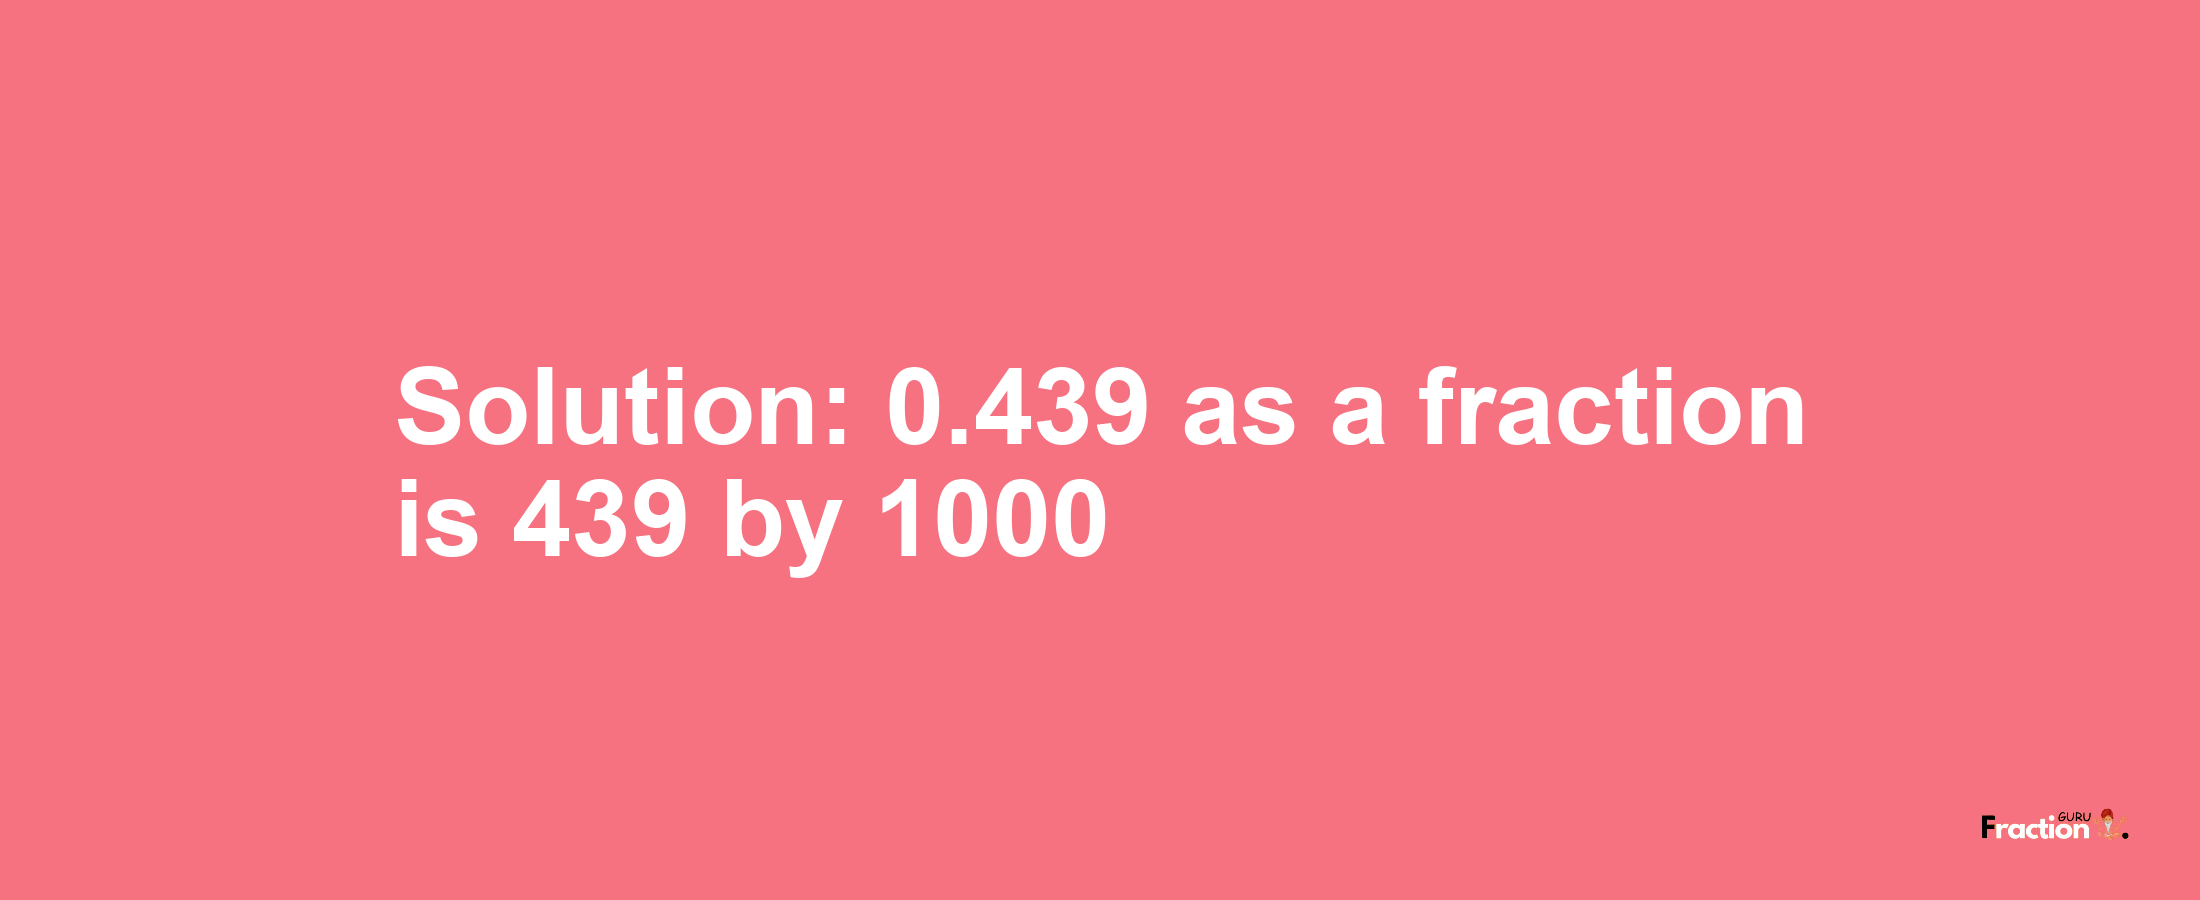 Solution:0.439 as a fraction is 439/1000